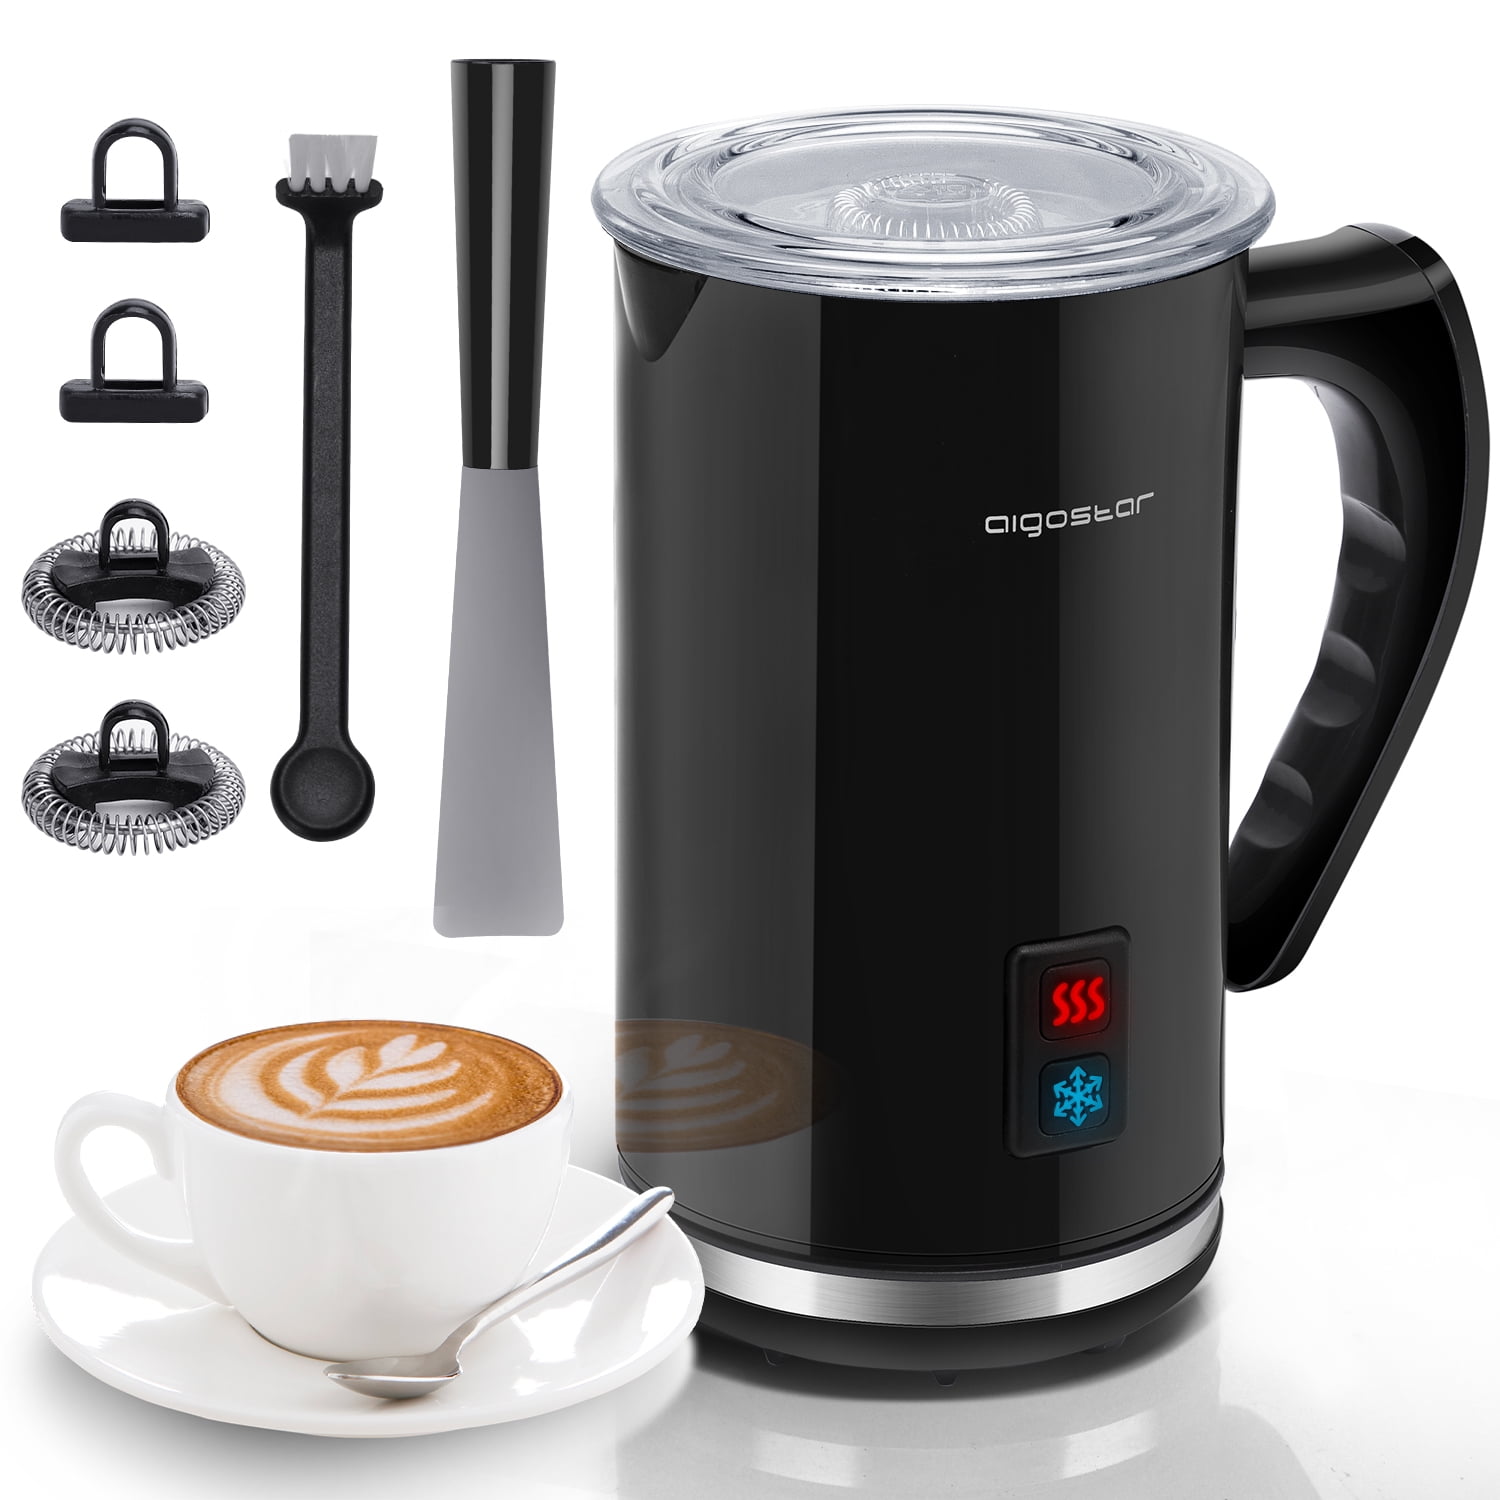 8.4 oz. Black 4 in 1 Electric Milk Frother Automatic Hot and Cold Milk Foam  Maker and Milk Warmer for Latte Macchiato Yea-LQD0-VQTJ - The Home Depot